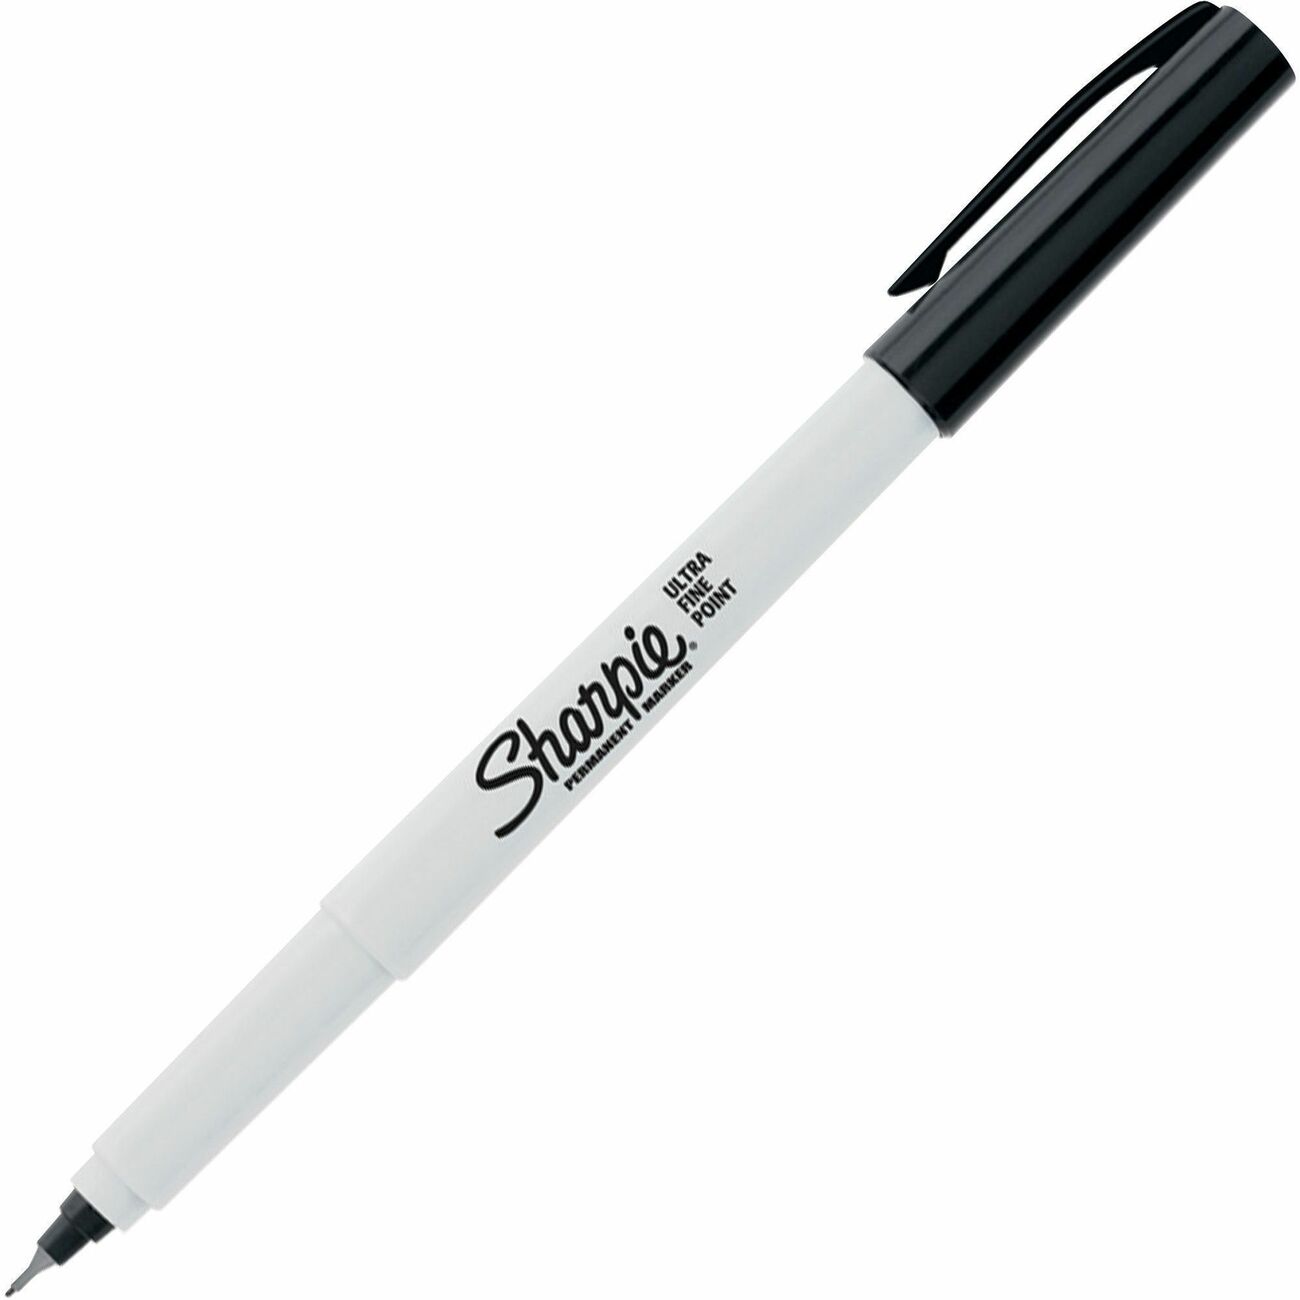 Sharpie Twin Tip Permanent Marker Red - Office Depot